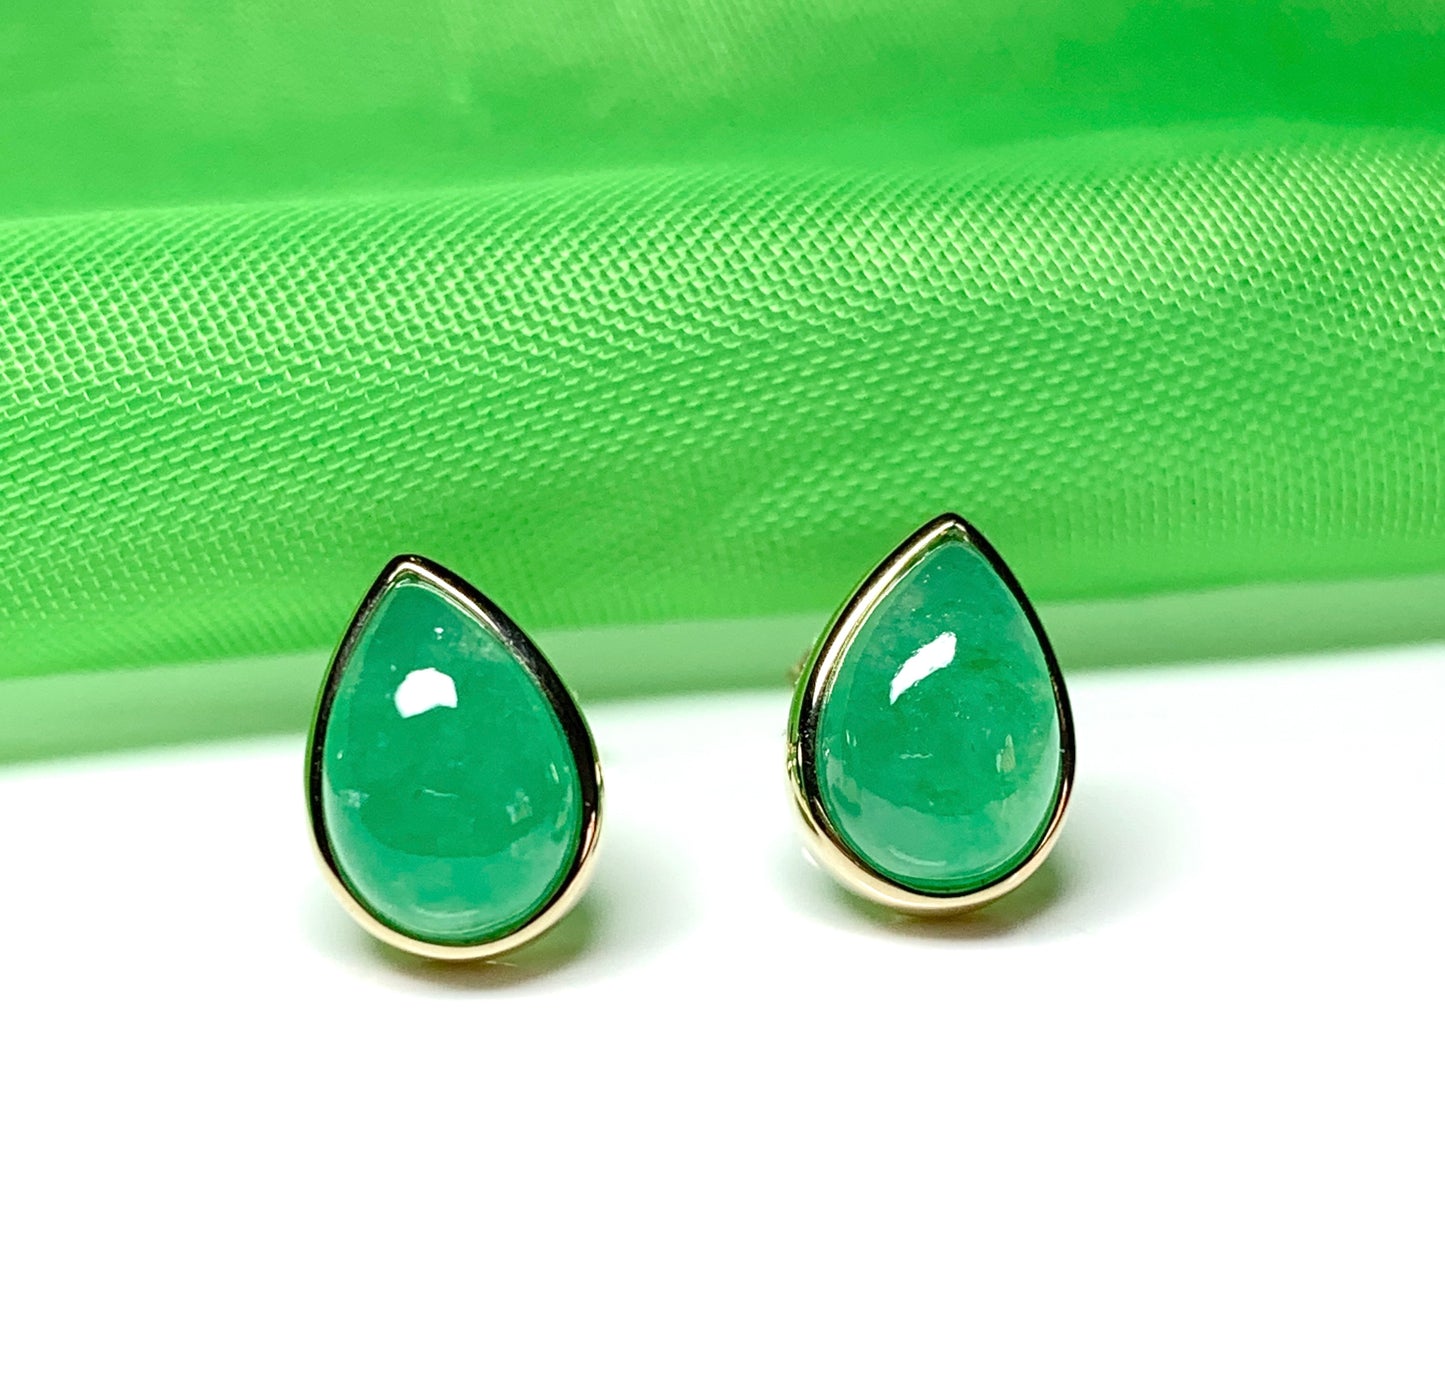 Real jade stud earrings green pear teardrop rubbed over smooth setting yellow gold